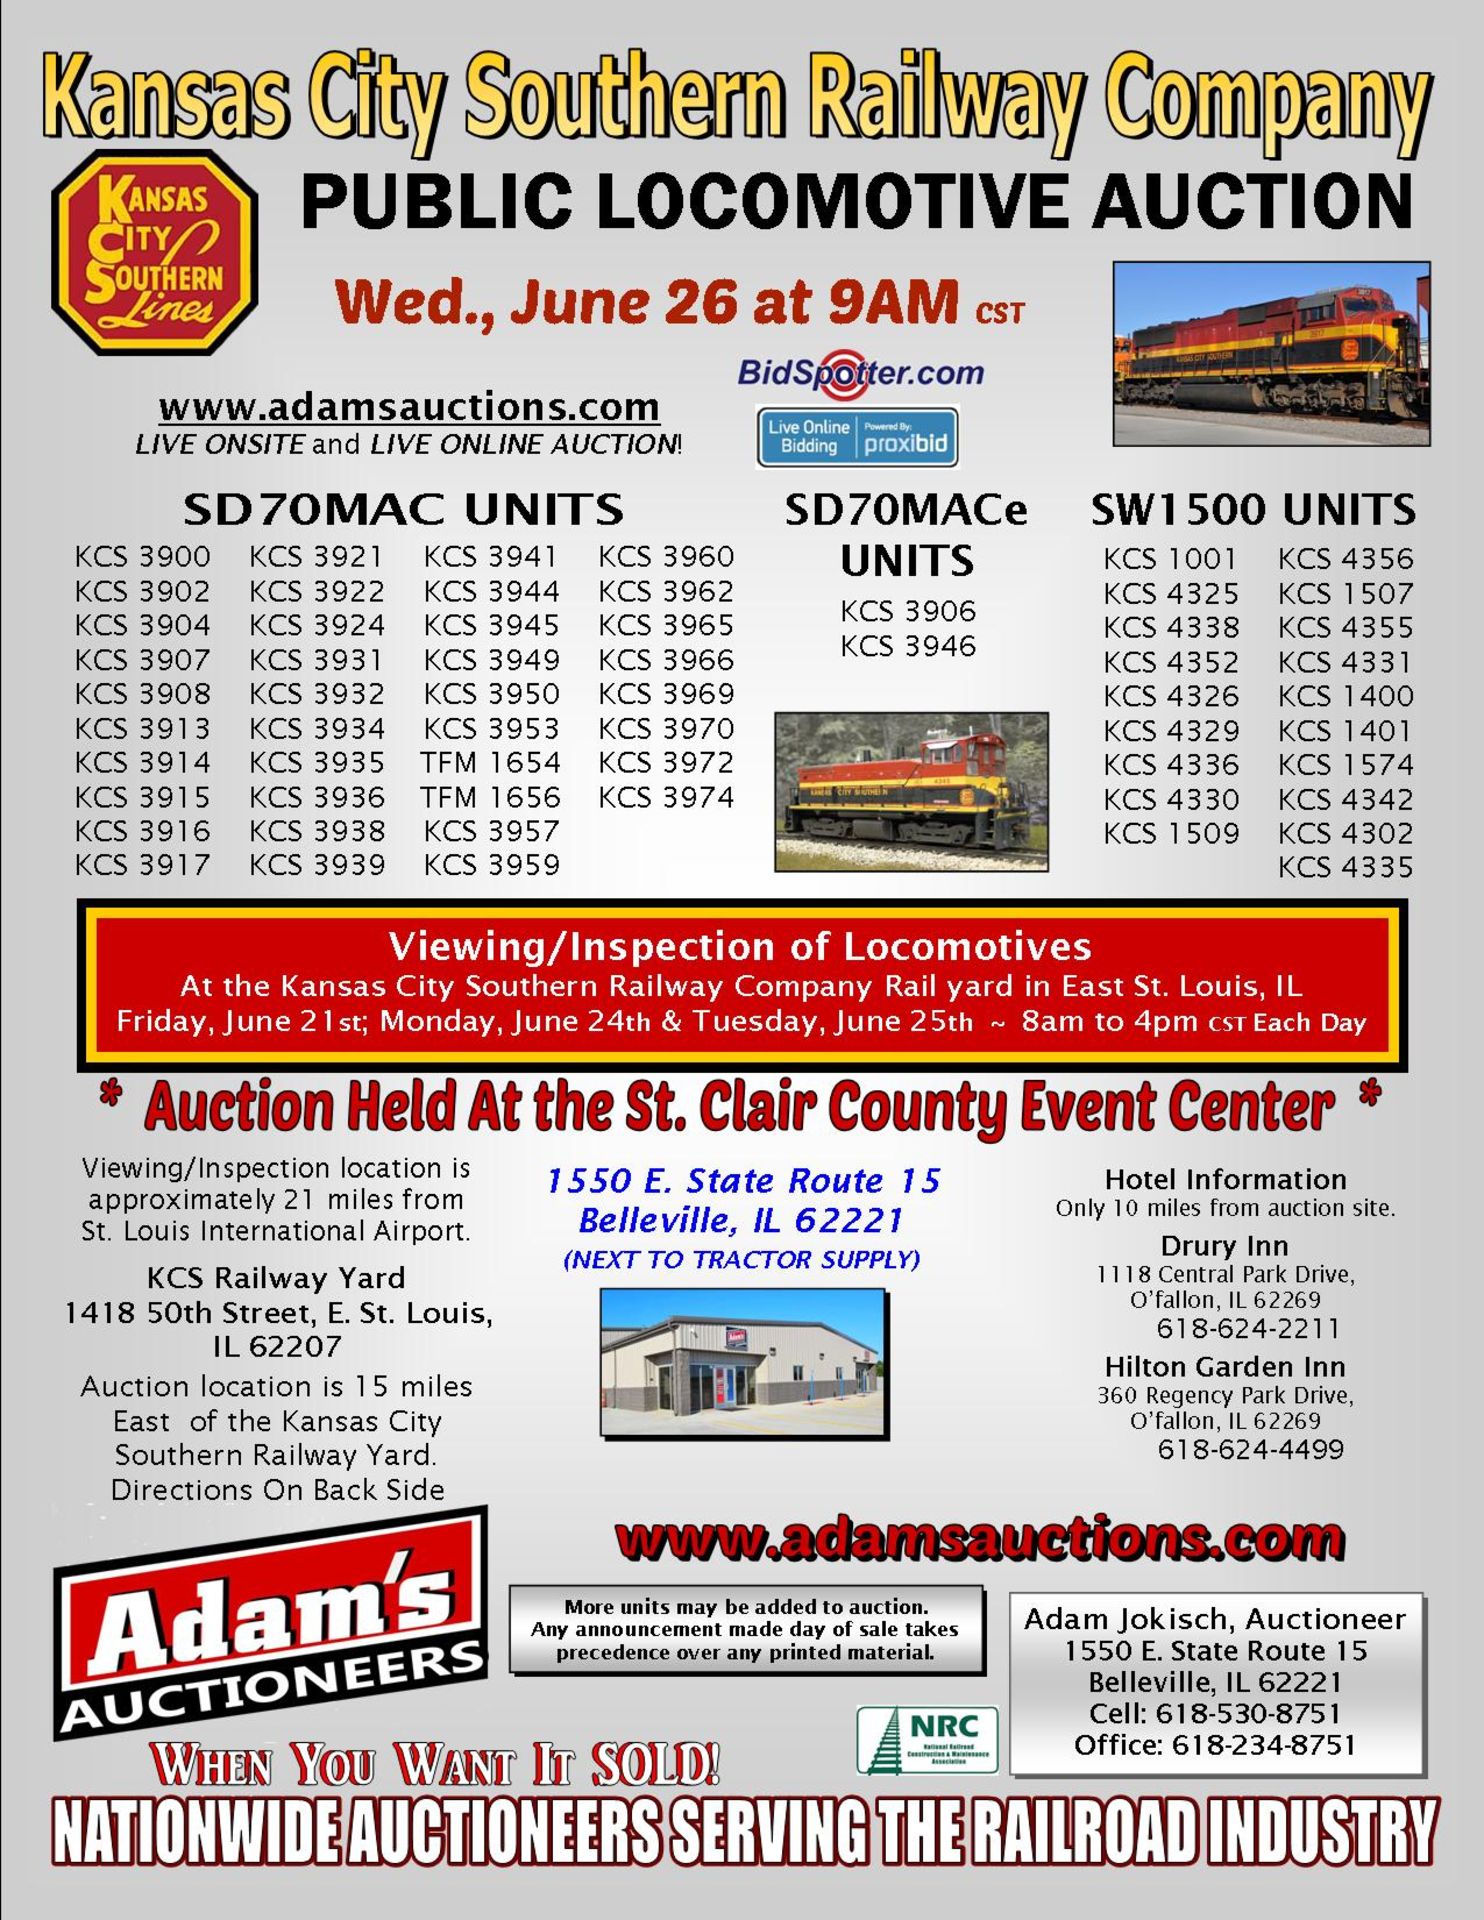 Sale Notice with Directions to Locomotive Location and Auction Location